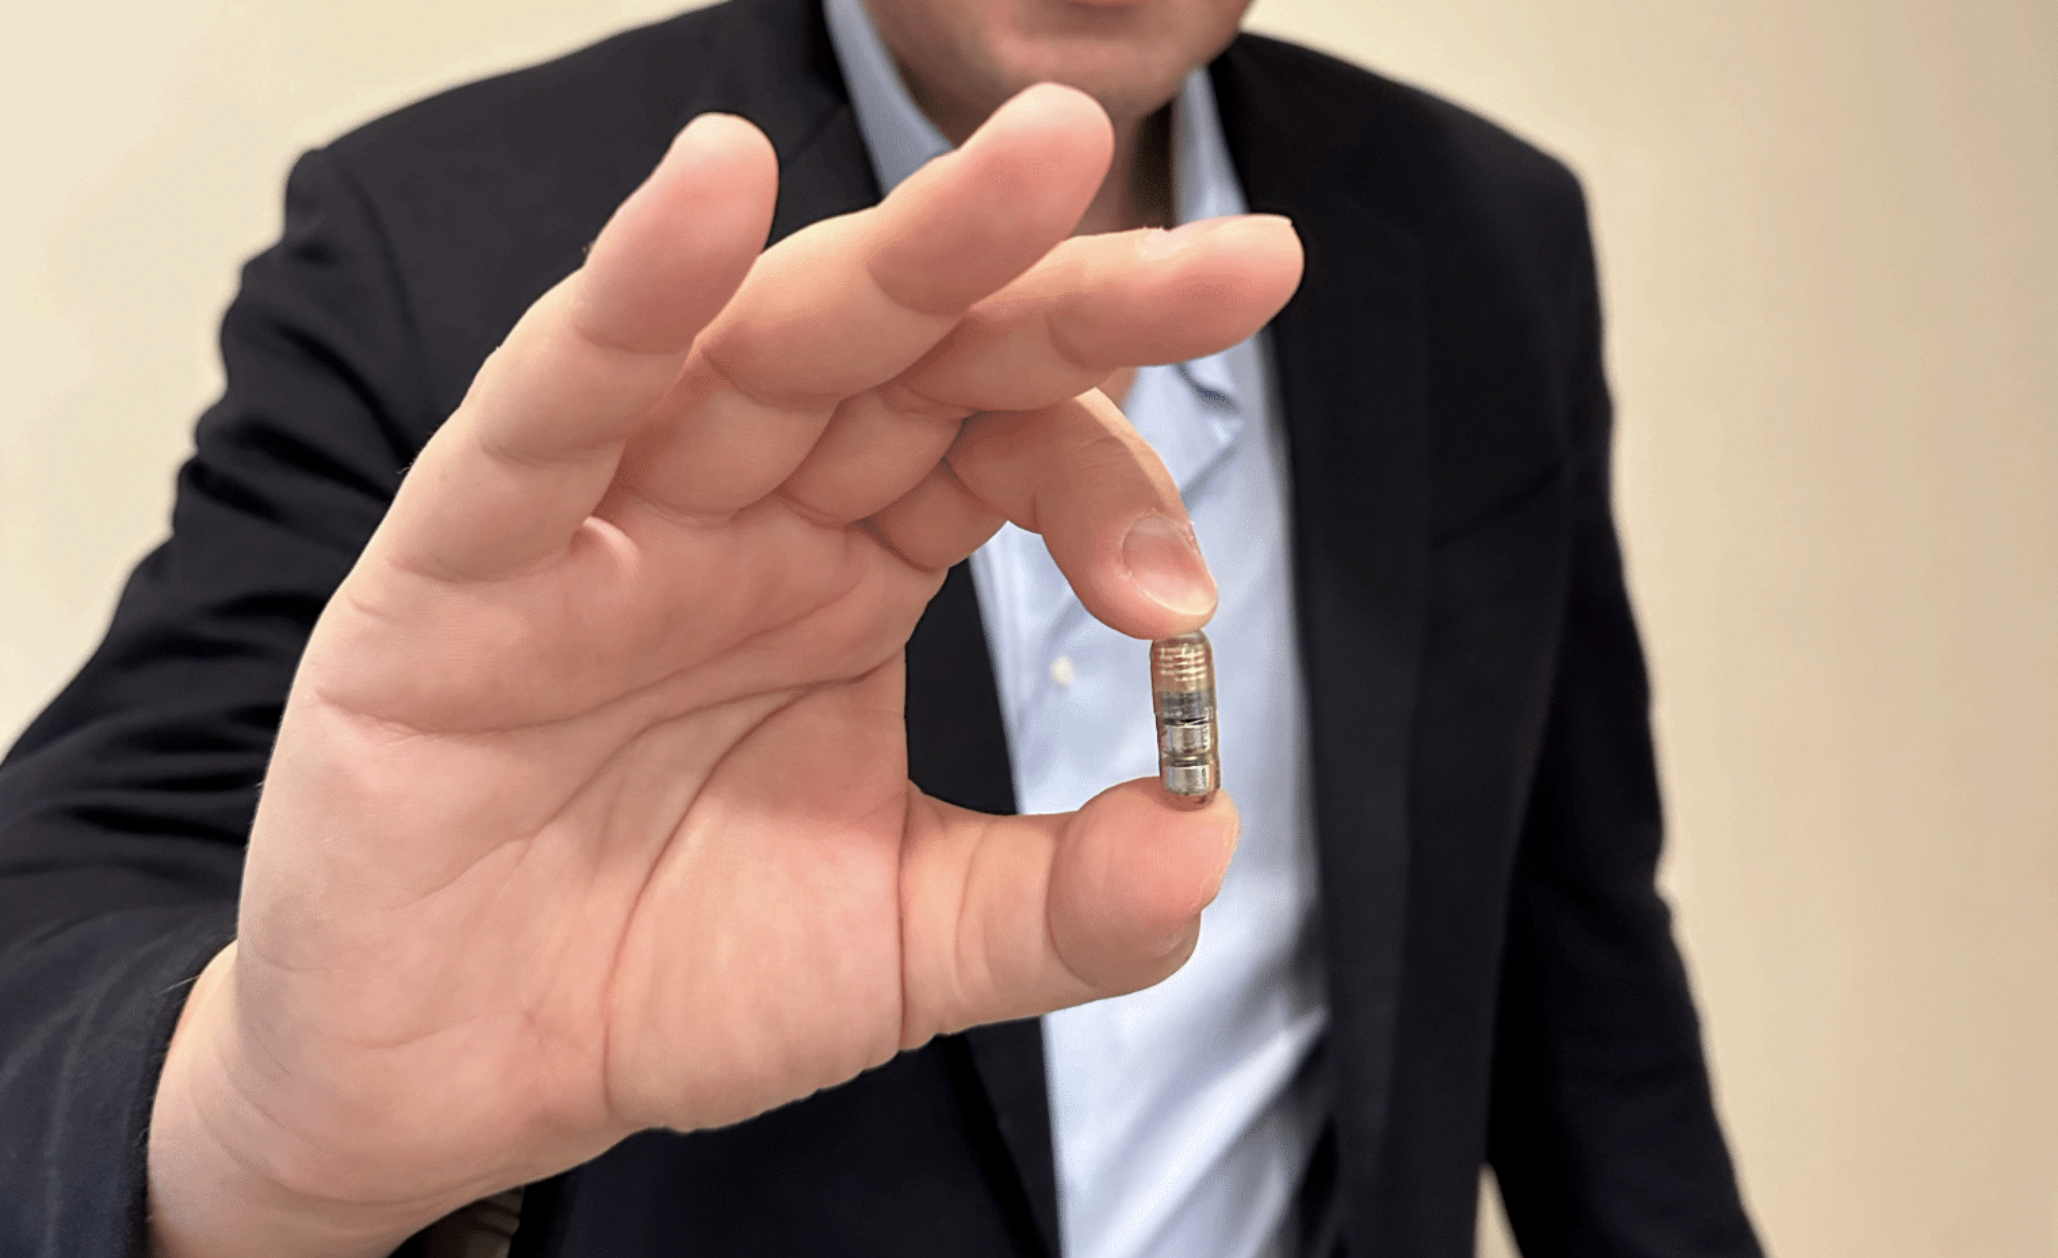 MIT tests new ingestible sensor that records your breathing through your intestines